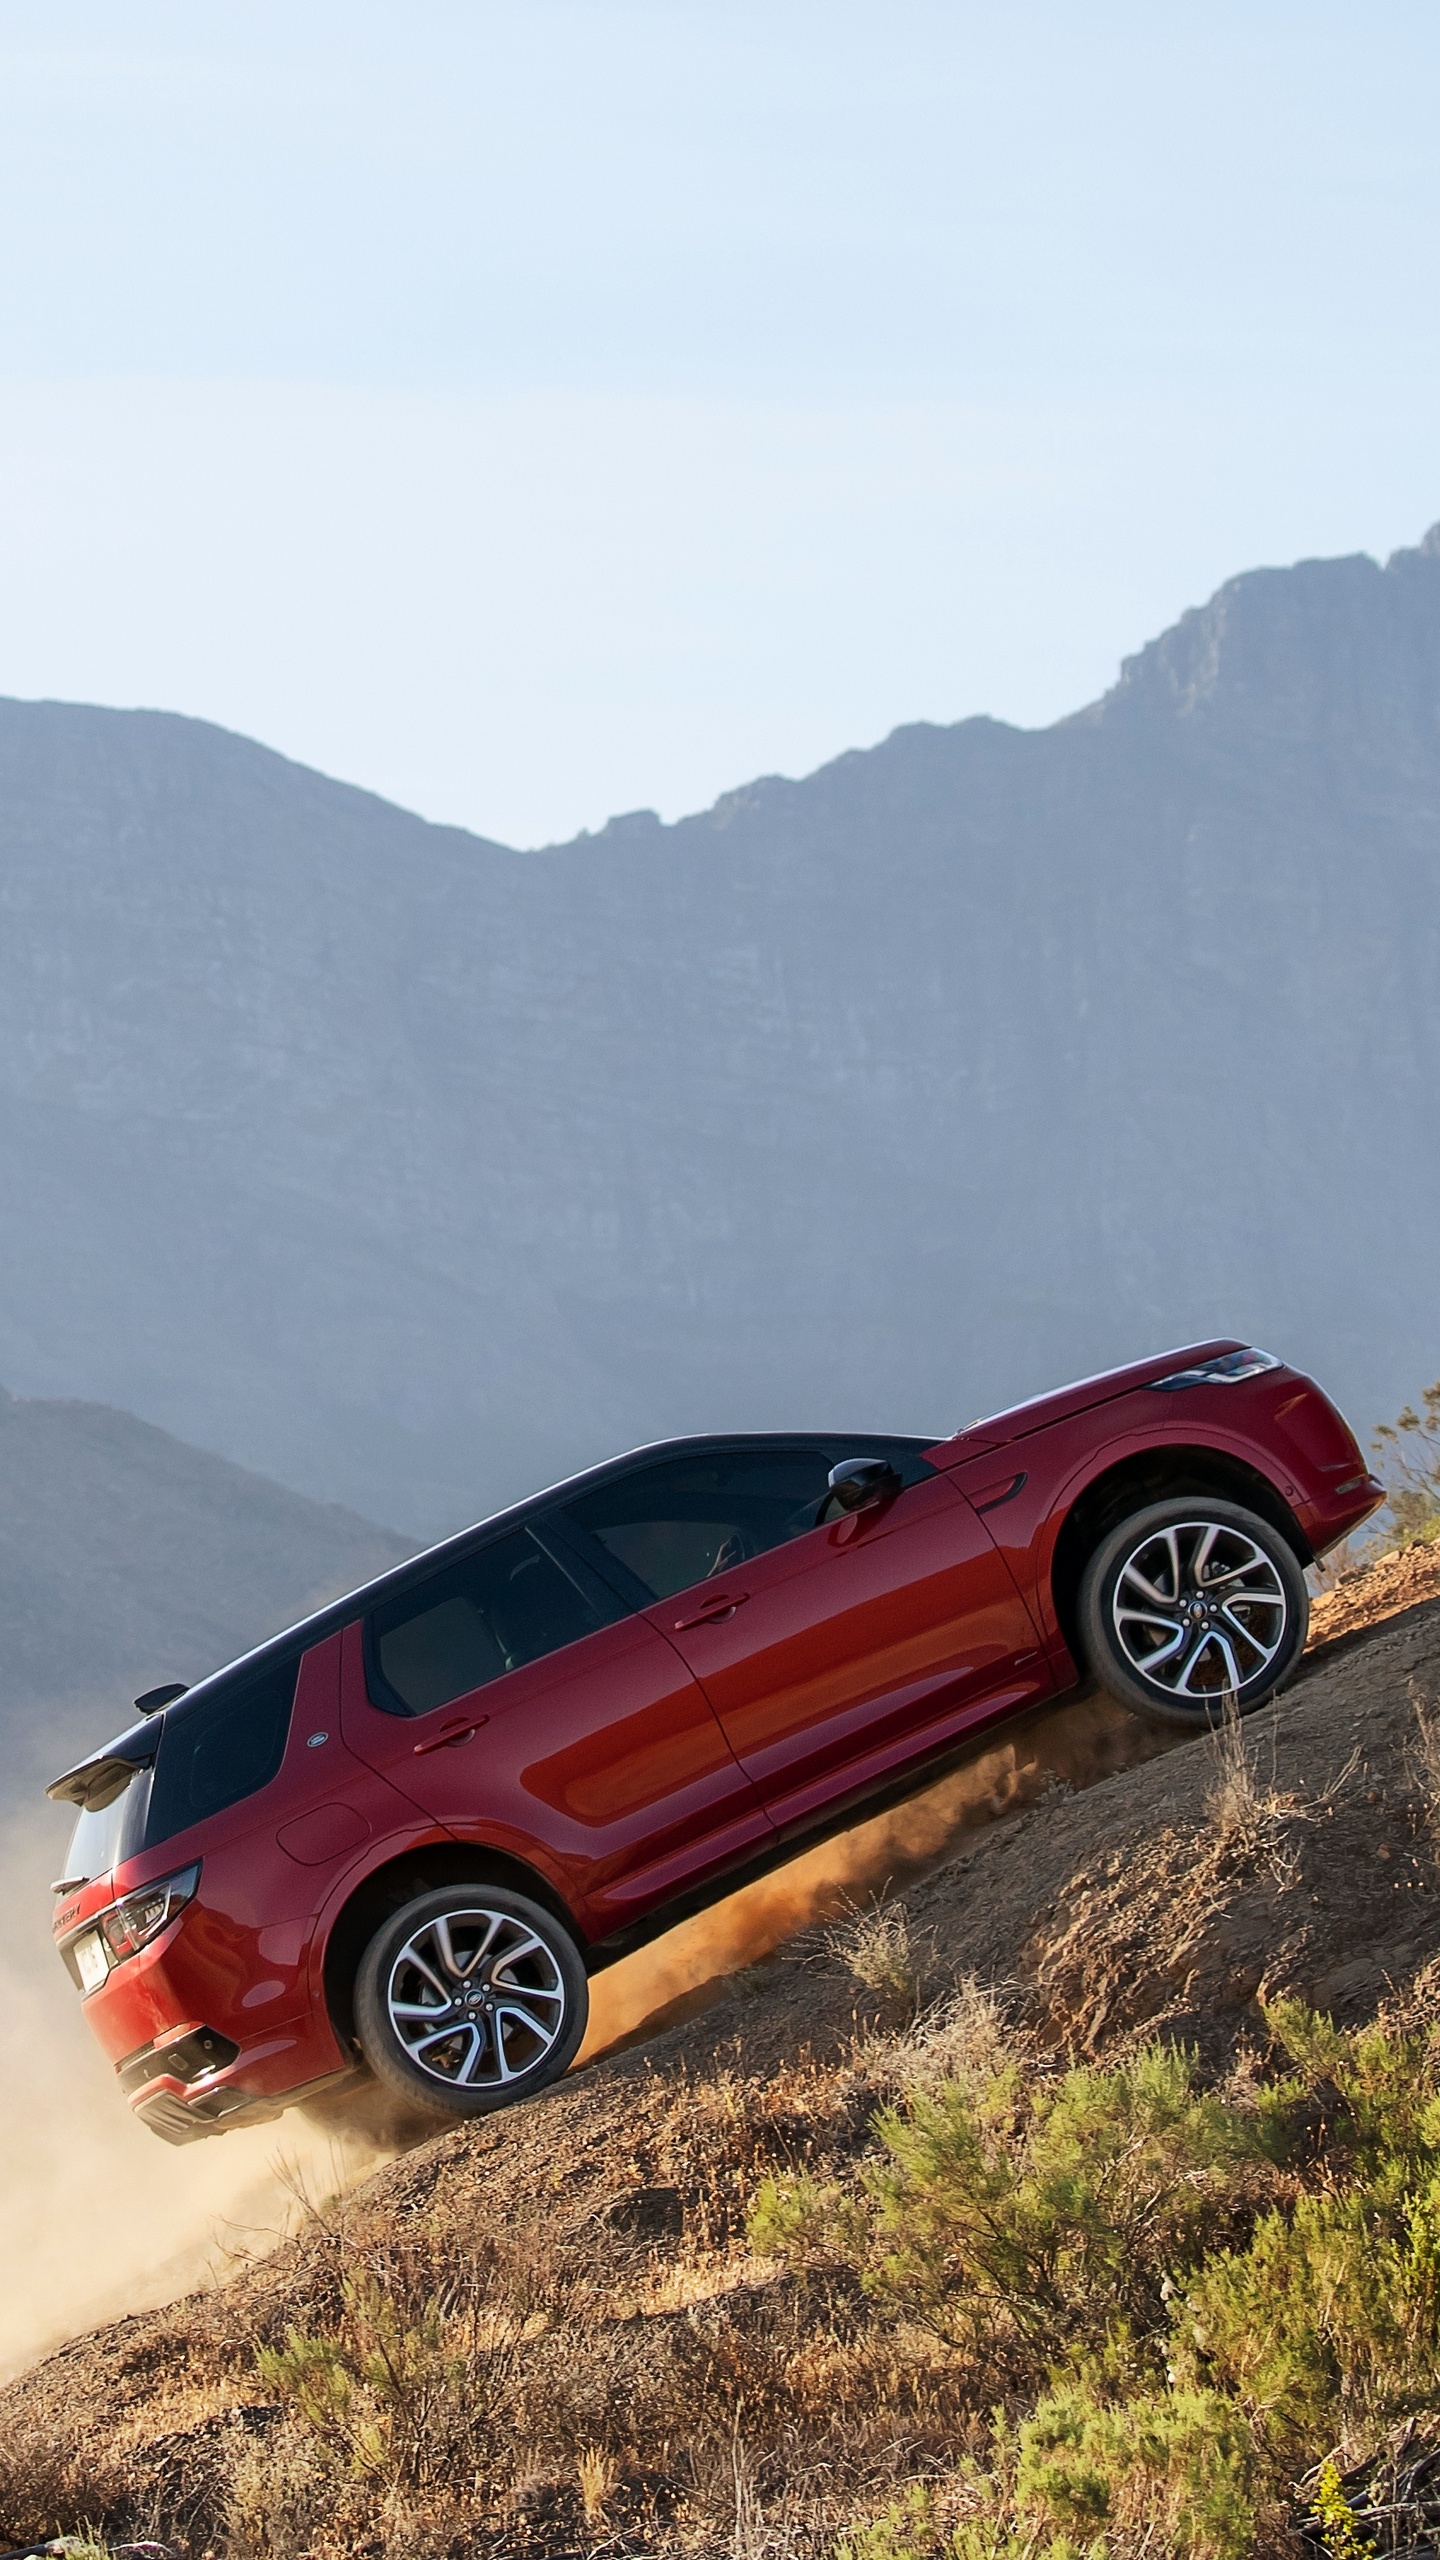 Land Rover Discovery Sport Phone Wallpaper